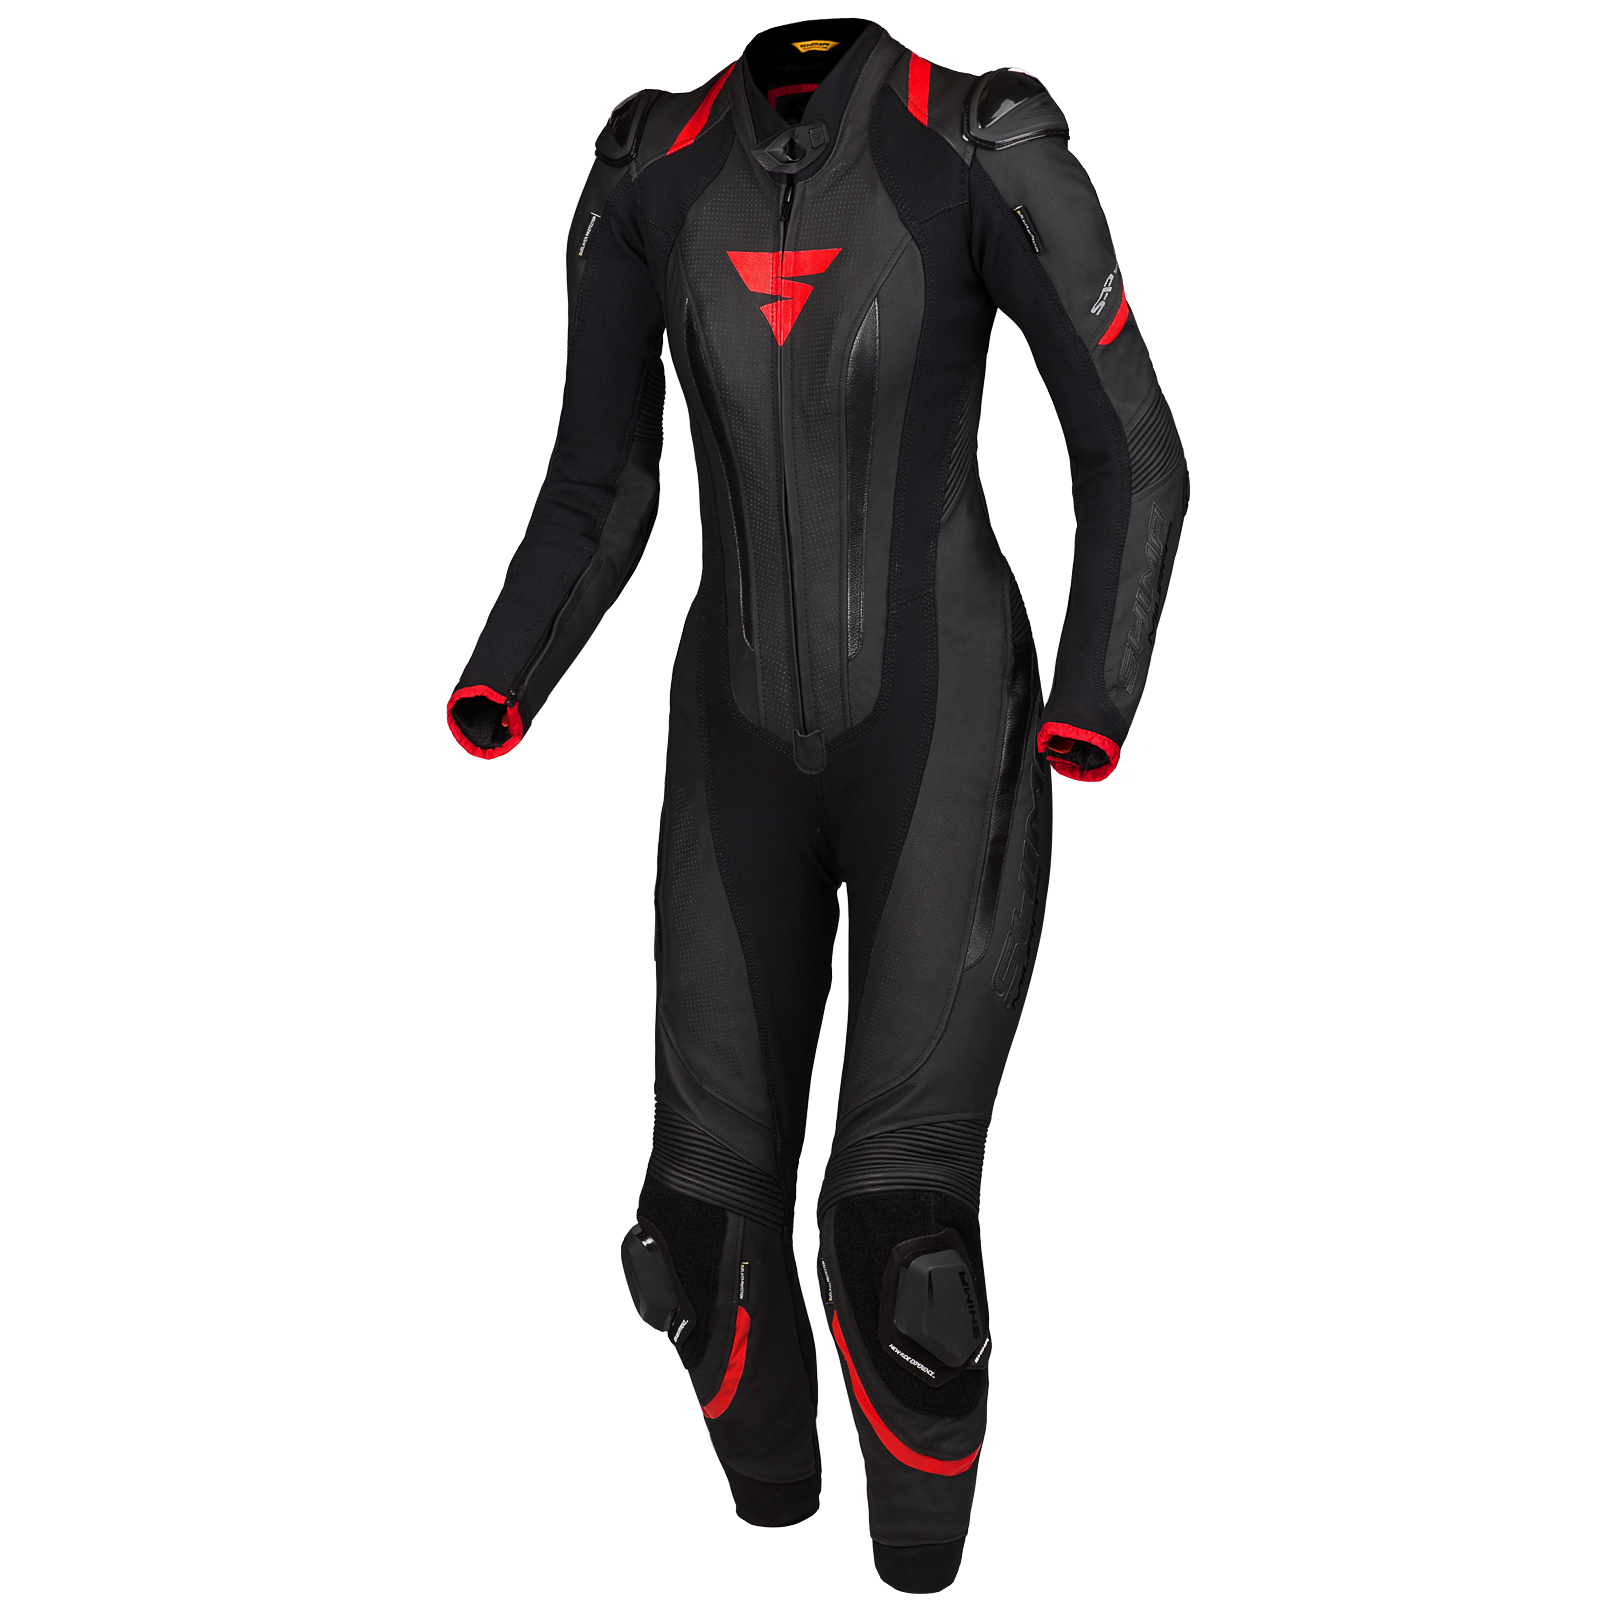 Black and red women's motorcycle racing suit from Shima from the front